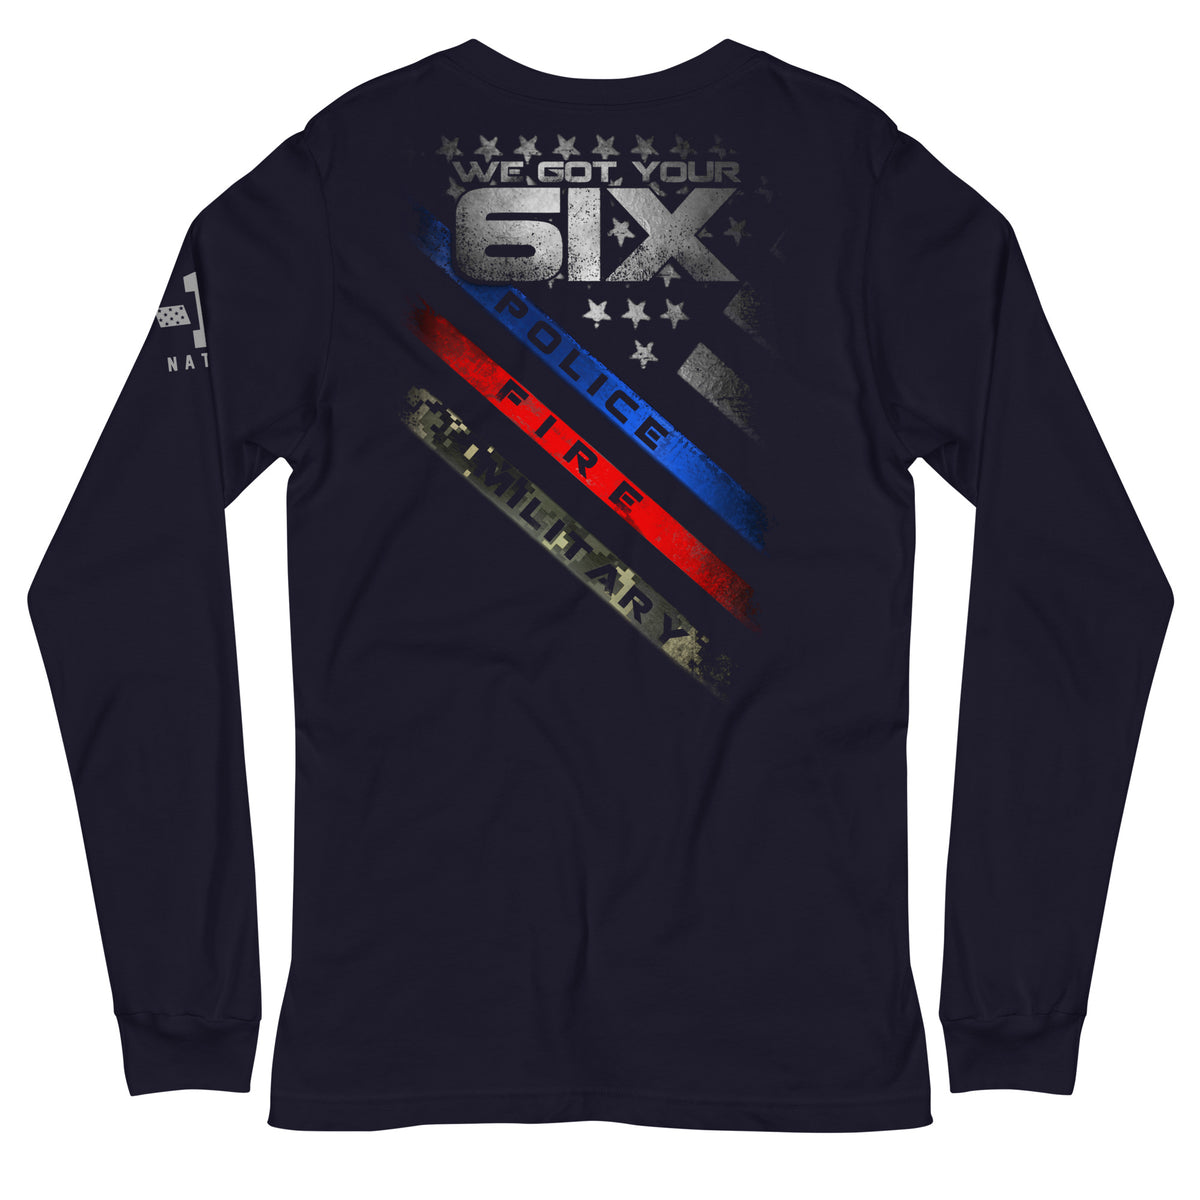 Police Fire Military: We Got Your Six Long Sleeve